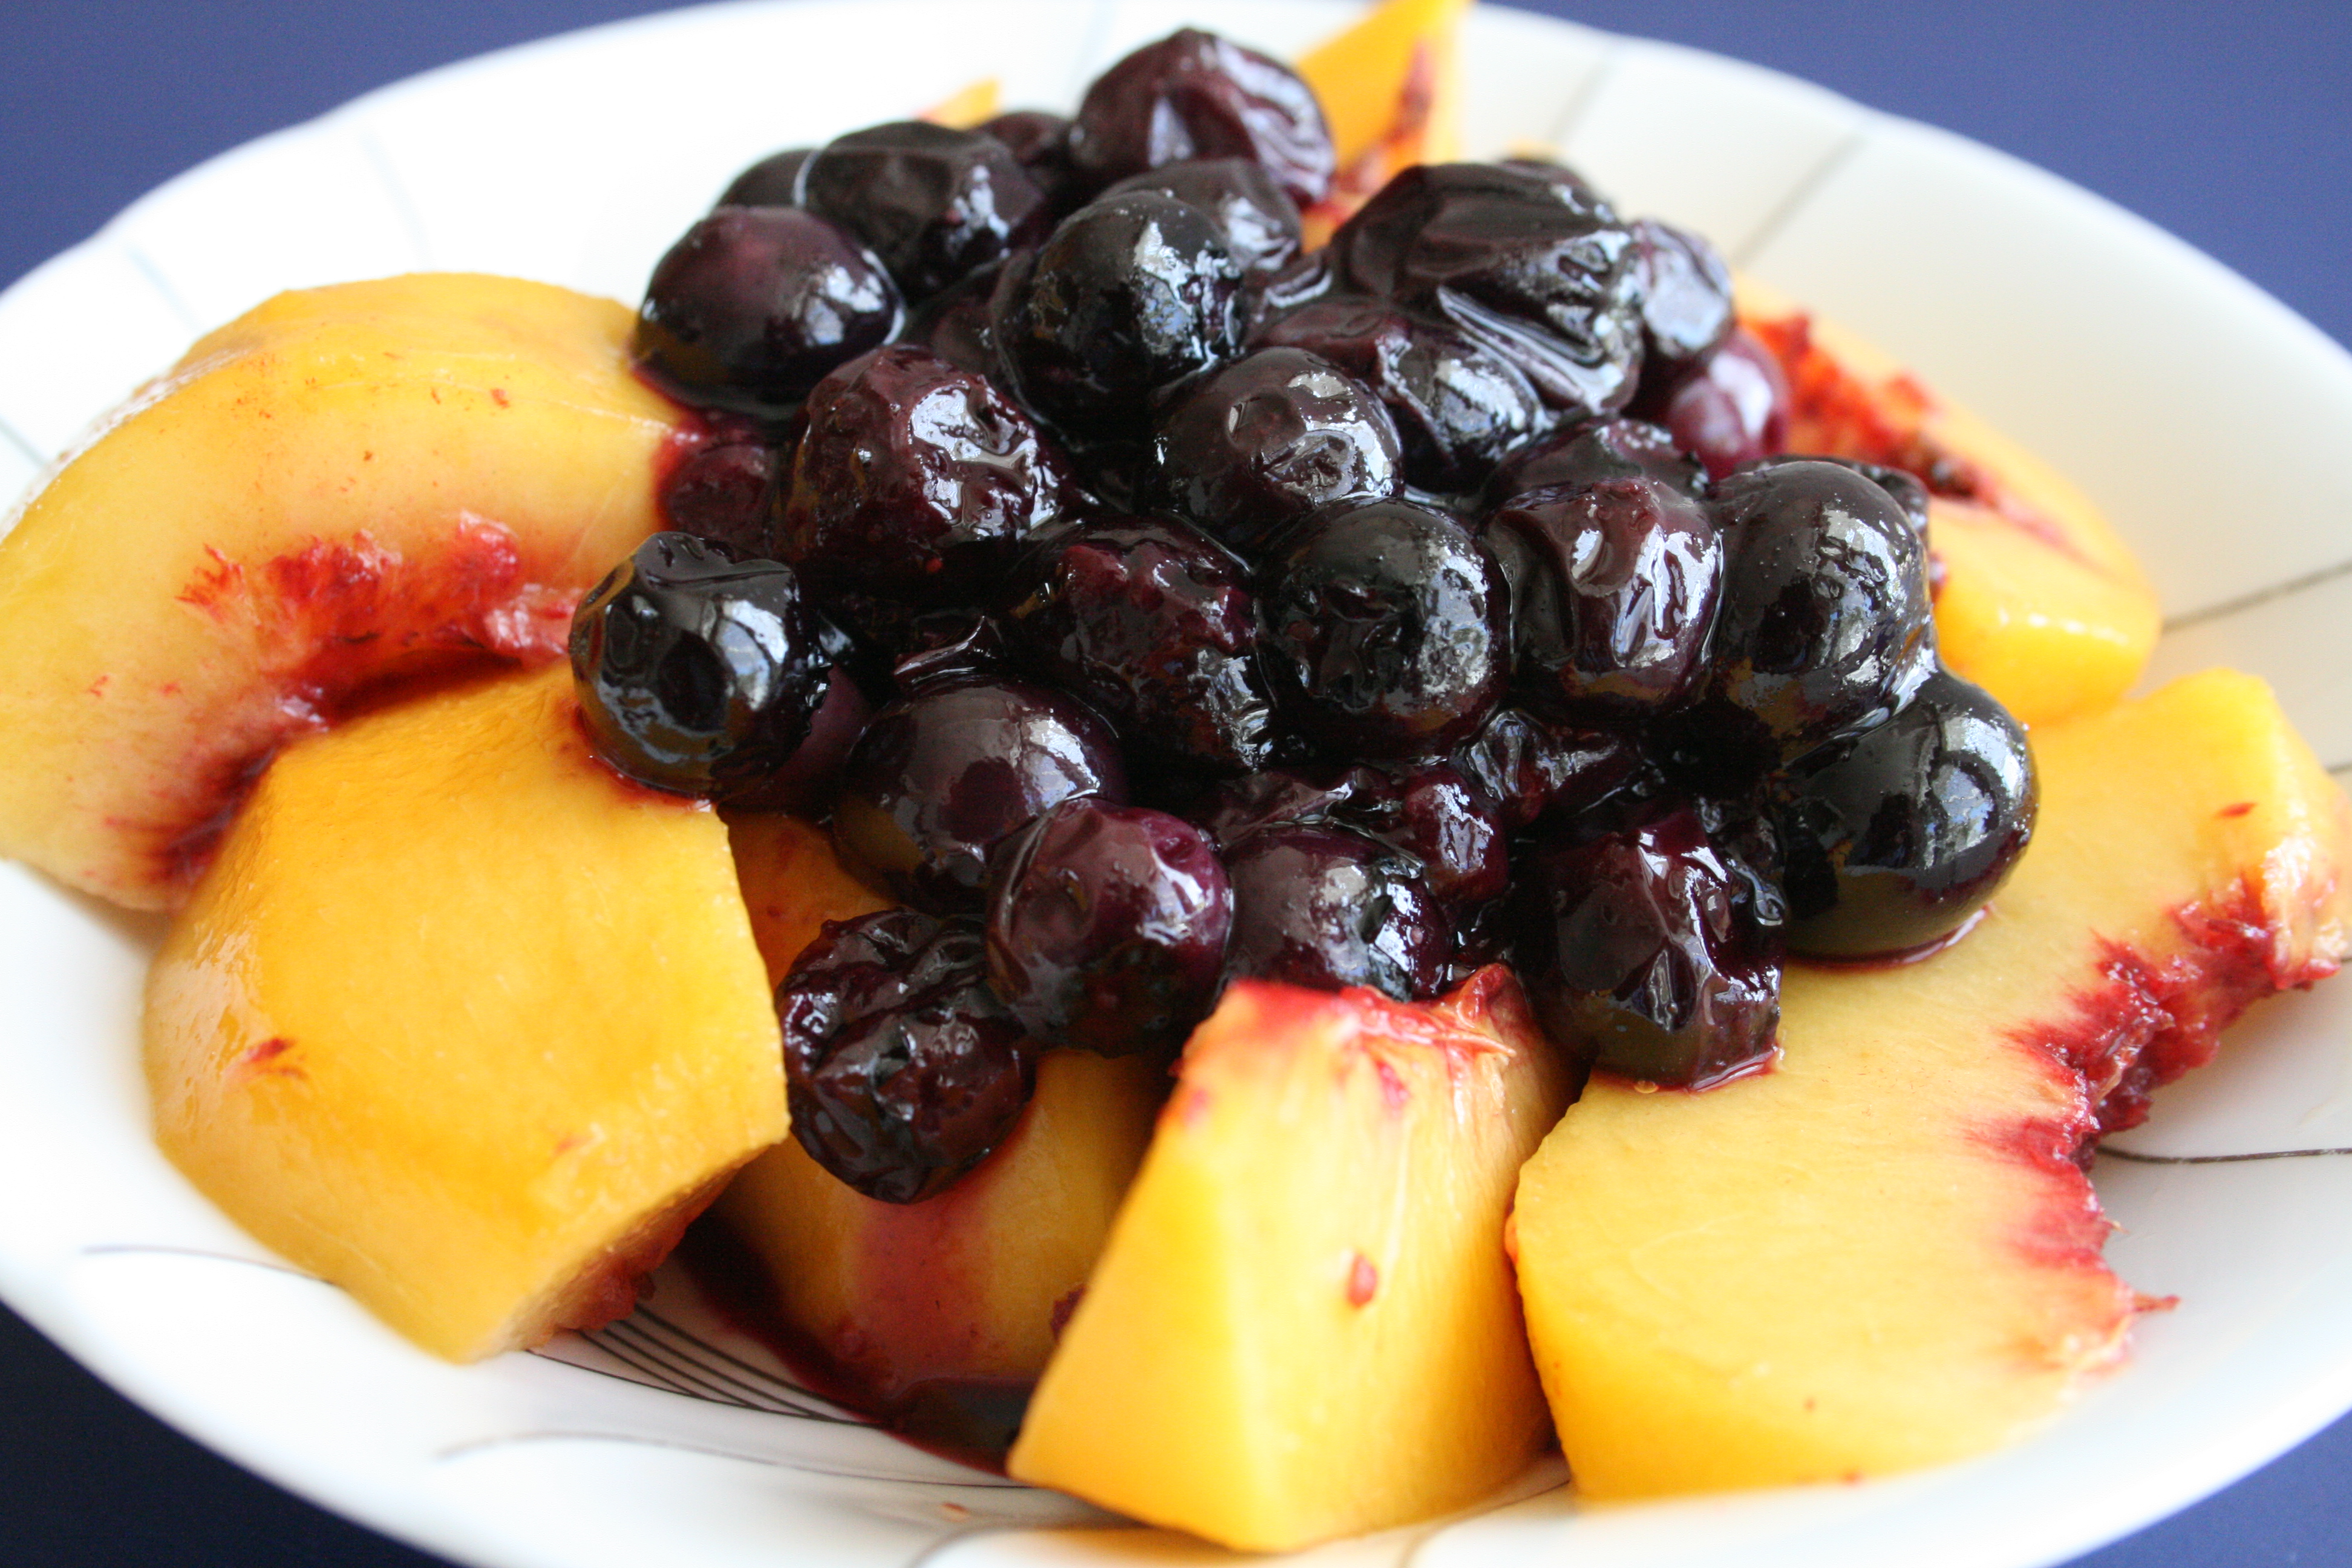 Blueberry Sauce on top of sliced peaches in a white bowl against a blue background